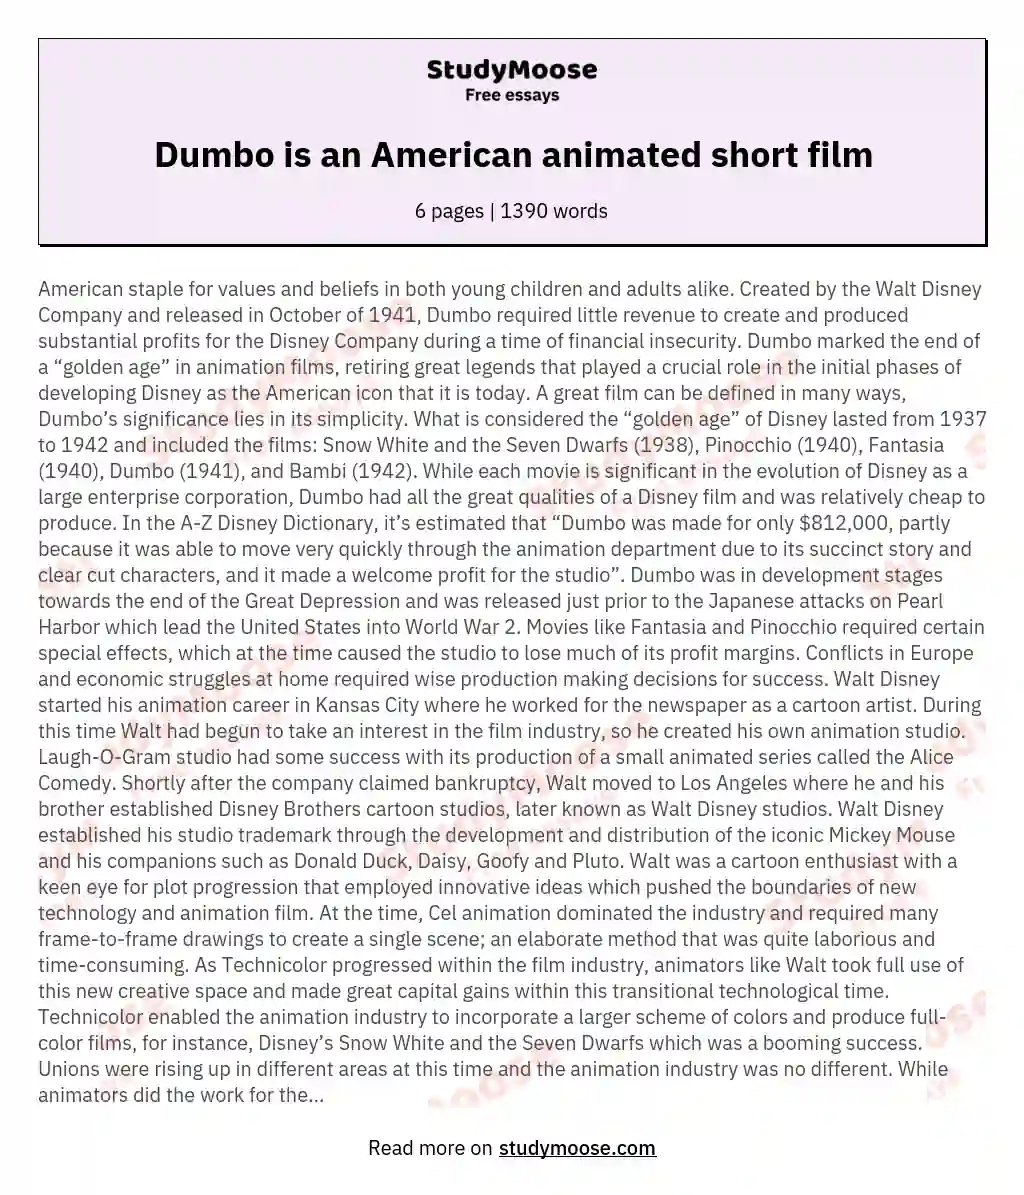 Dumbo is an American animated short film essay